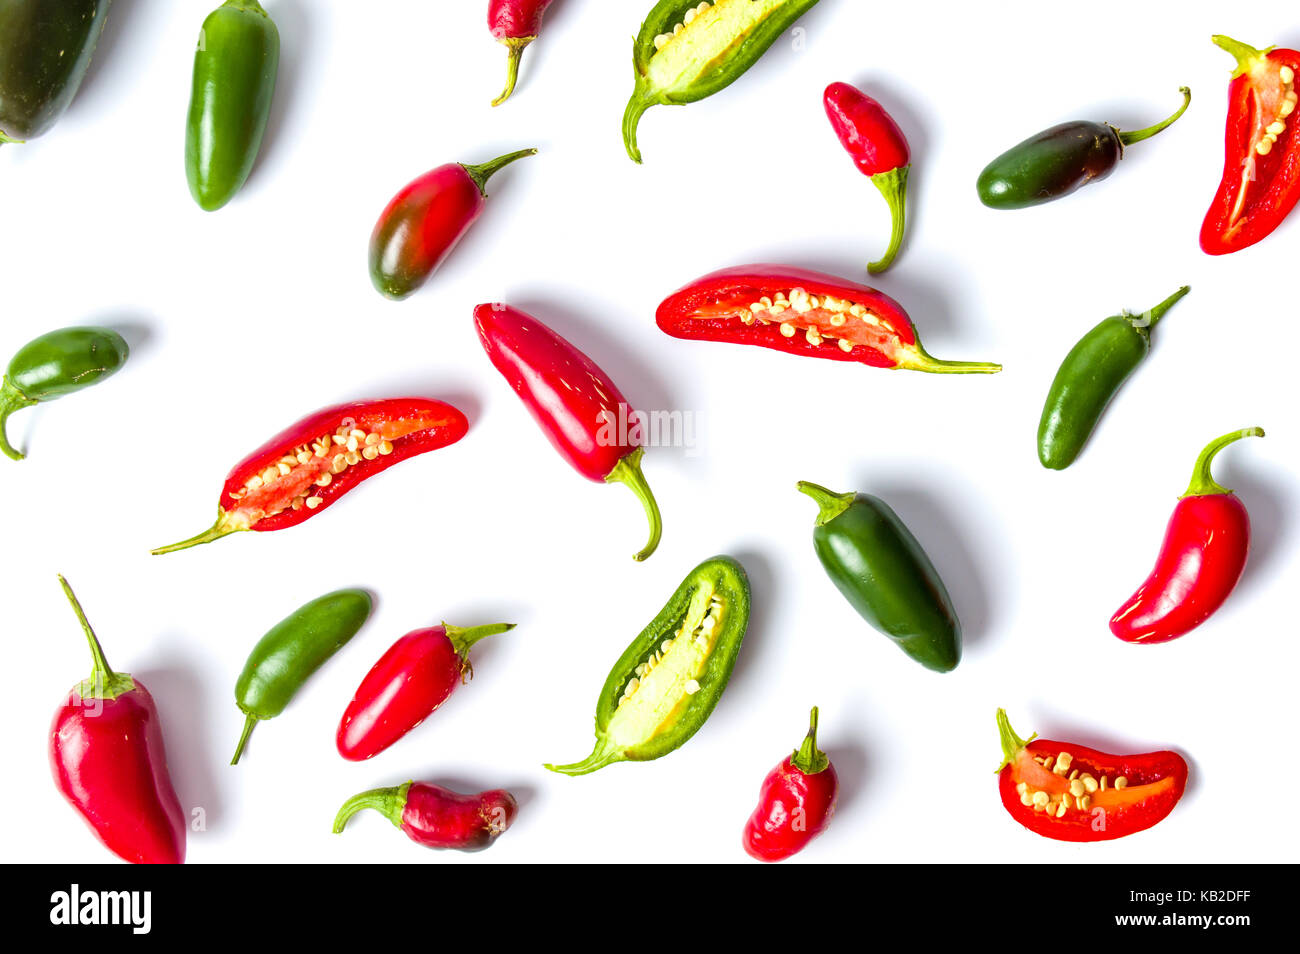 Colorful jalapenos peppers on white background isolated Stock Photo